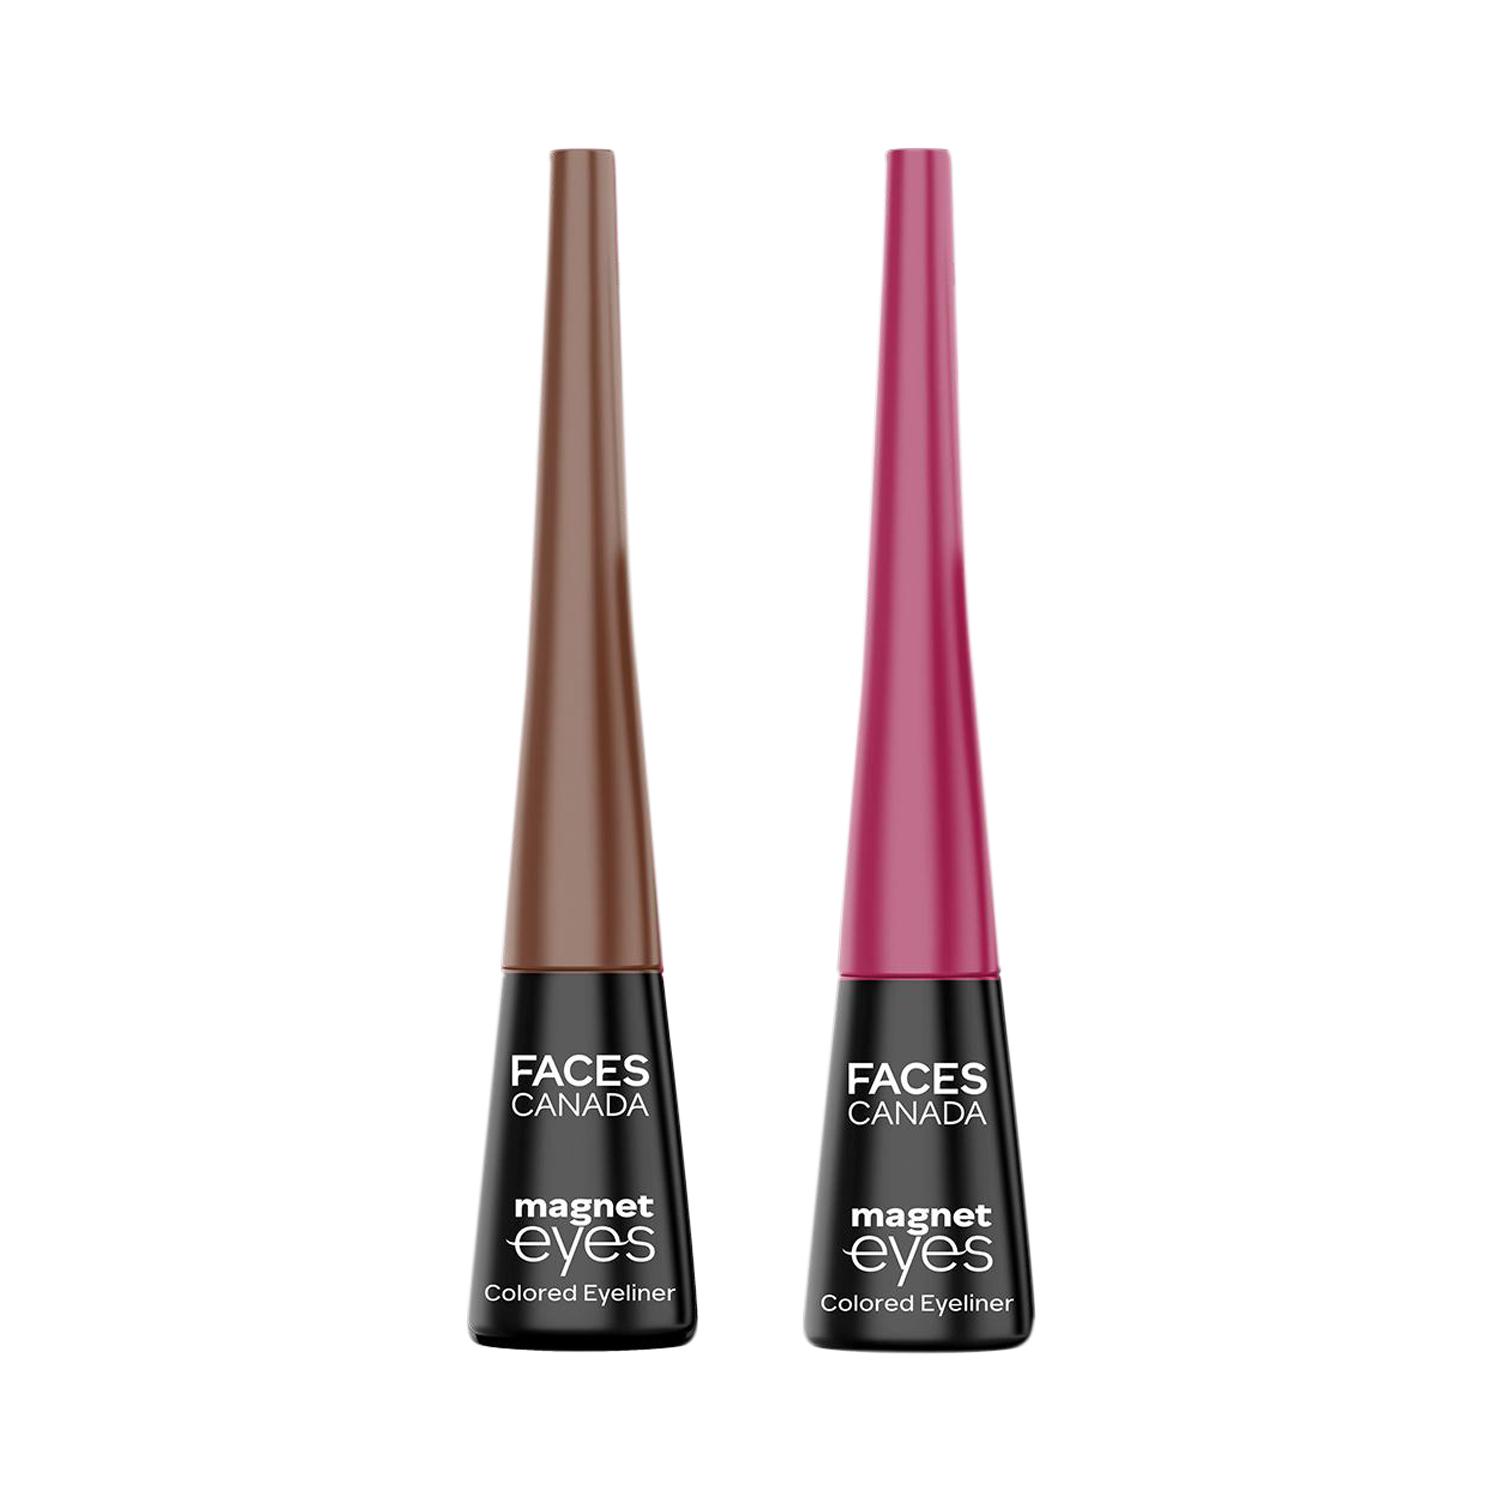 Faces Canada Magneteyes Color Eyeliners Combo - Powerful Brown and Graceful Burgundy (Pack of 2)